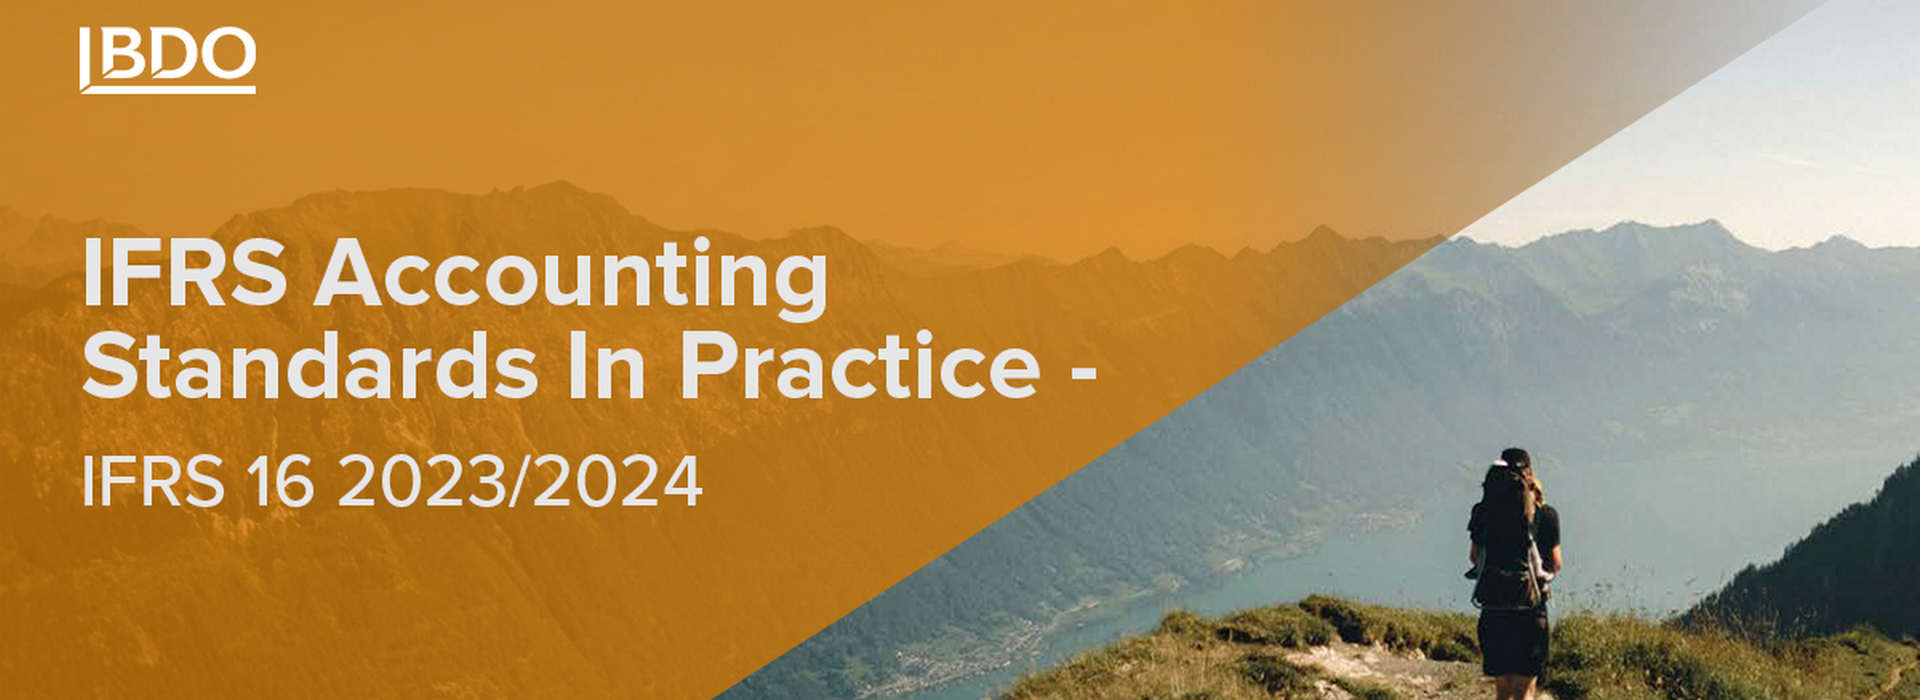 IFRS Accounting Standards In Practice – IFRS 16 2023/2024